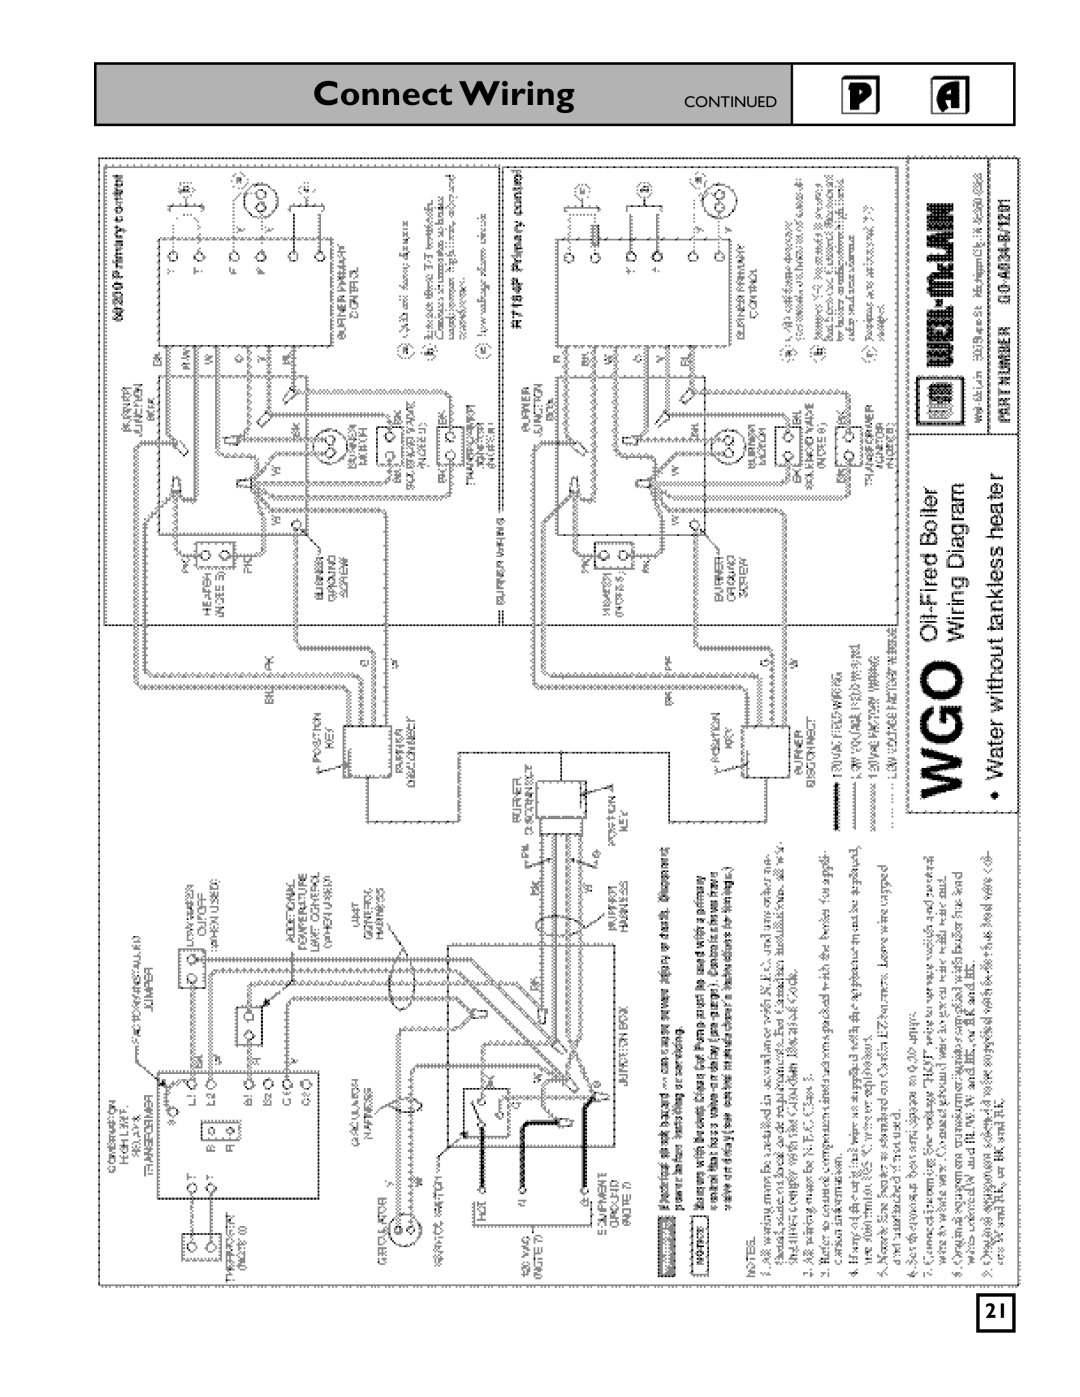 Weil-McLain 550-141-826/1201 manual Connect Wiring, Continued 